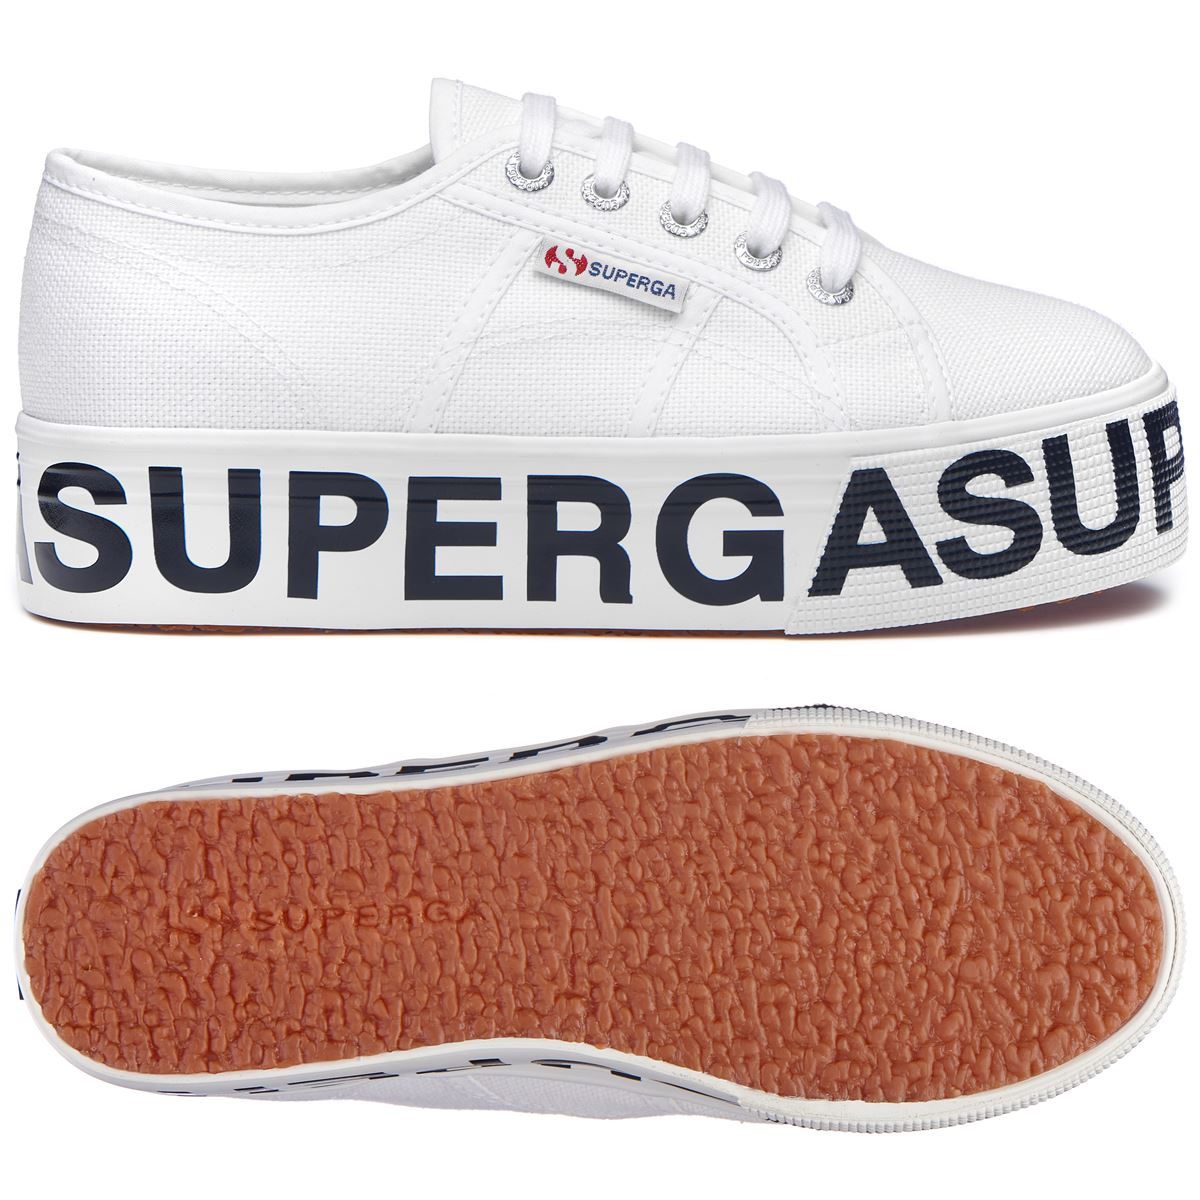  - Superga sneakers cotw outsole lettering